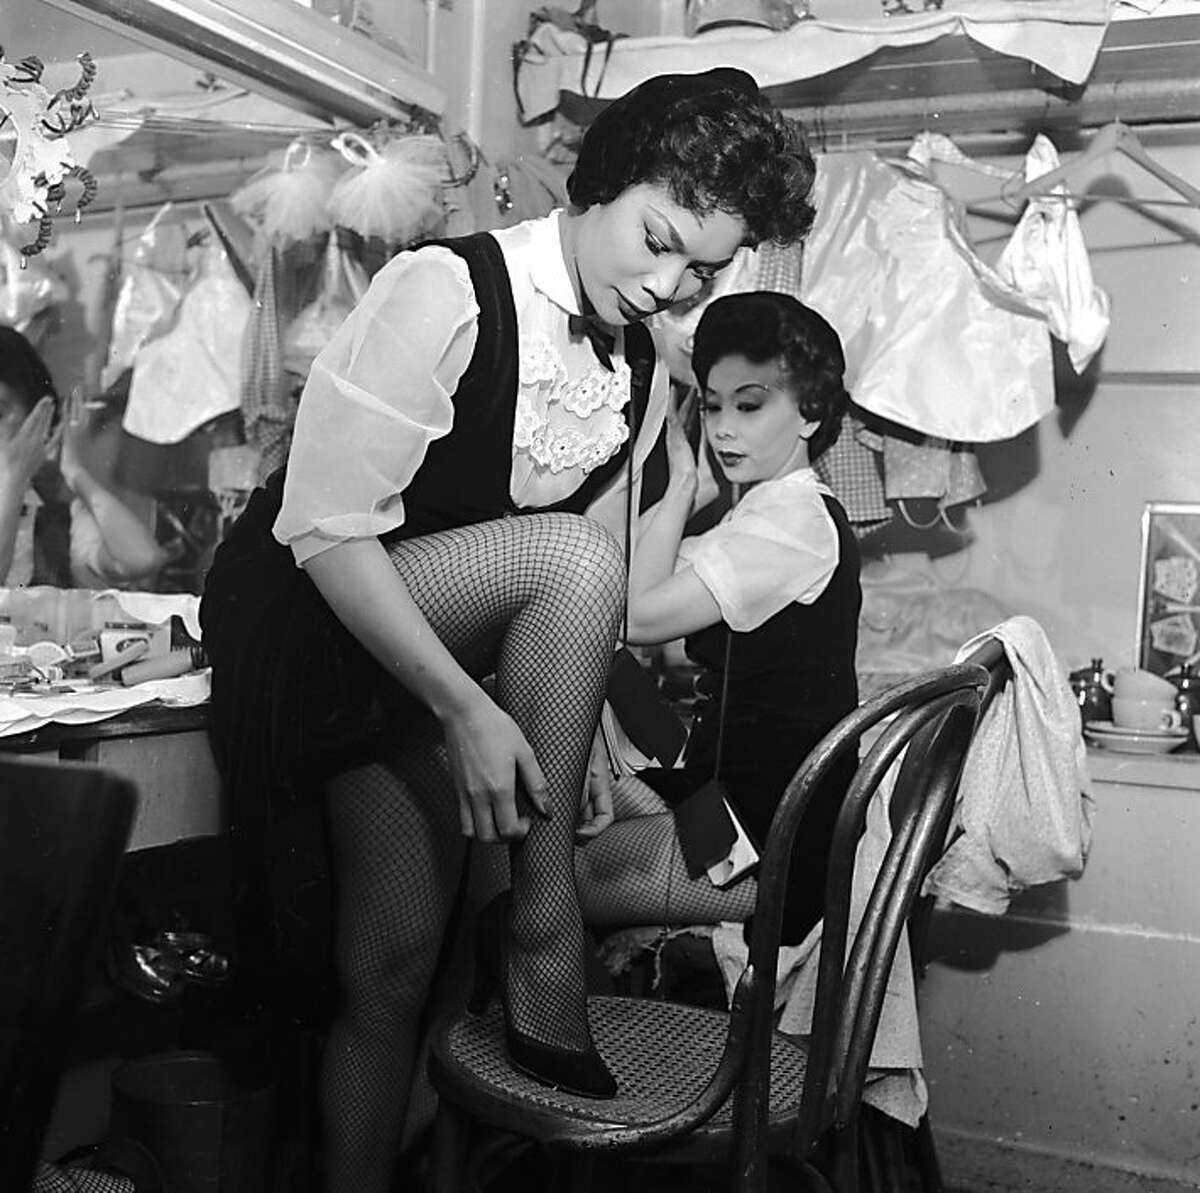 circa 1955: Two chorus girls prepare for their act in the dressing room of the Forbidden City nightclub in Chinatown, San Francisco.